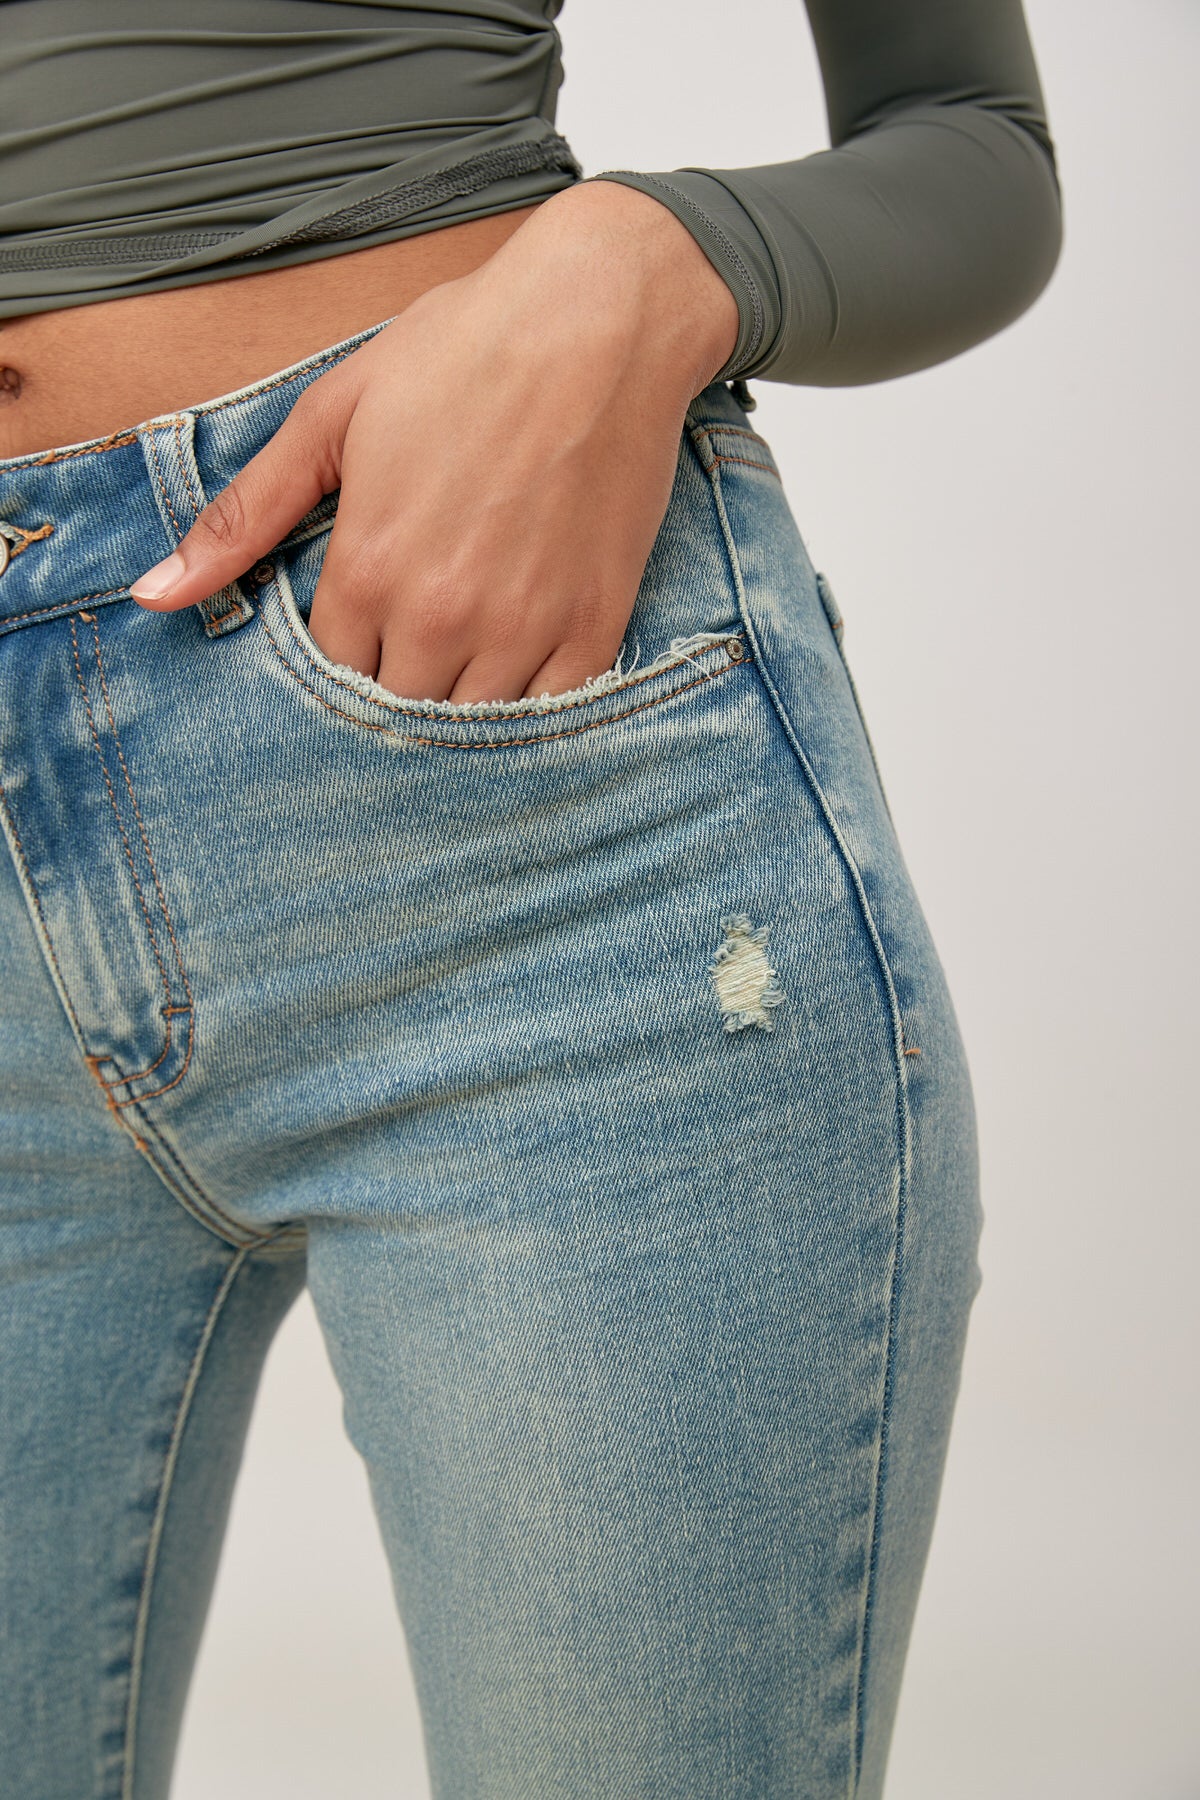 Slim jeans high waist tired worm effect - happiness